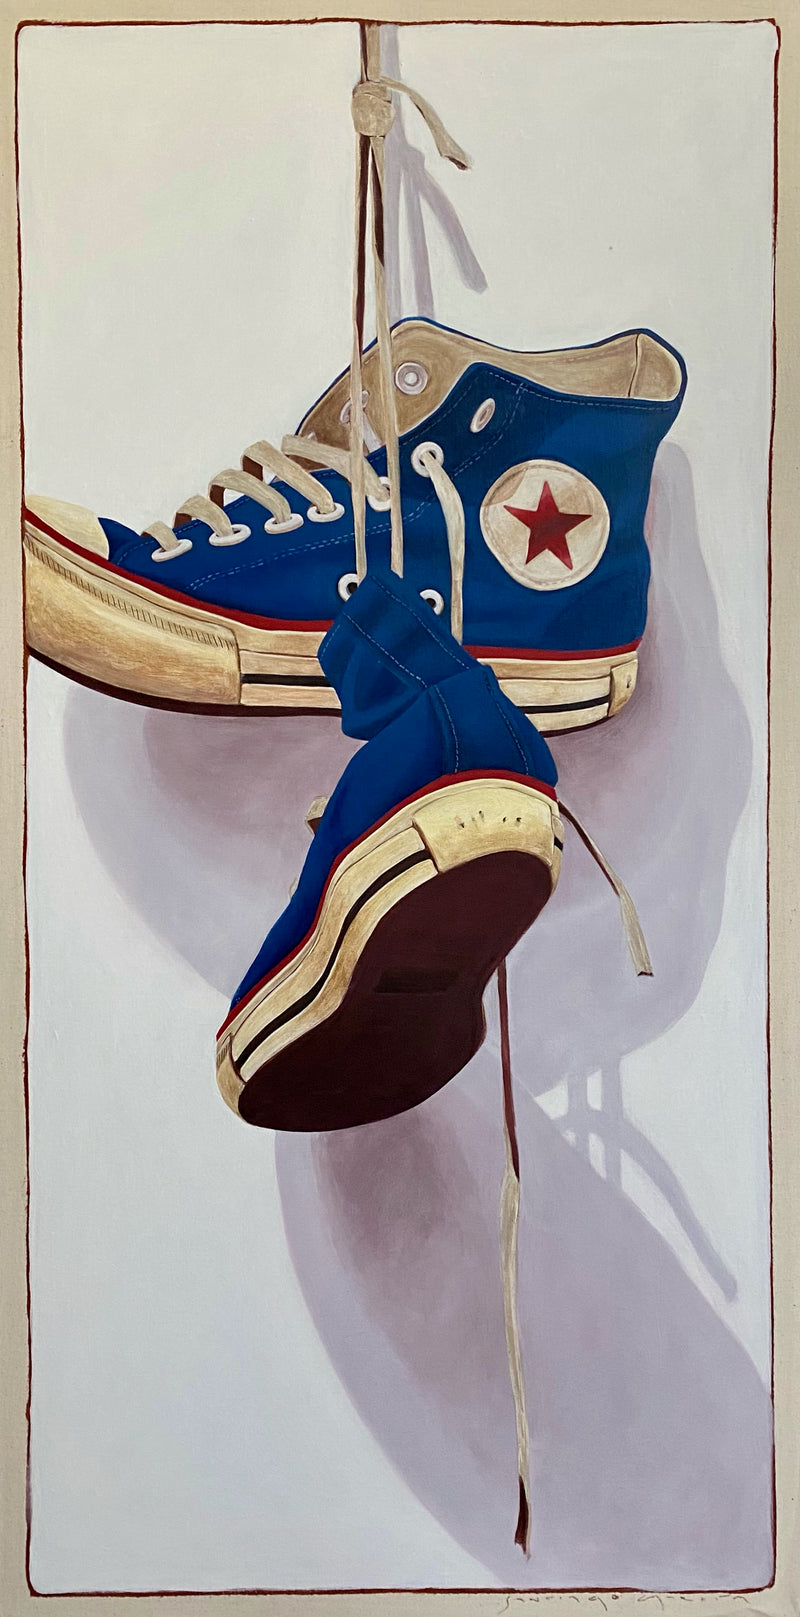 oil painting of dark blue high top converse sneakers hanging by tied laces